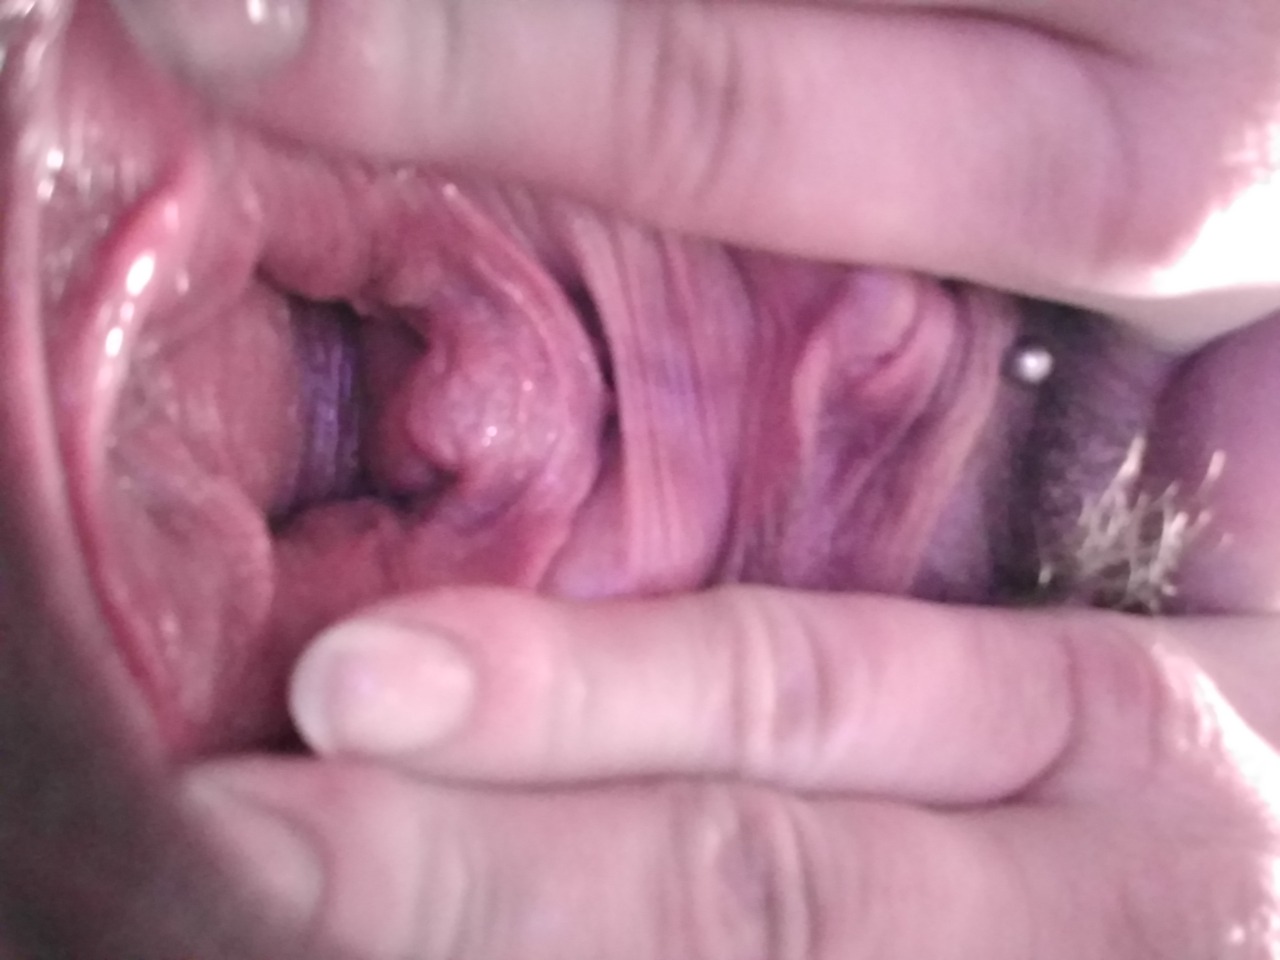 Wow, what a great characterful vagina @sexiskyler69